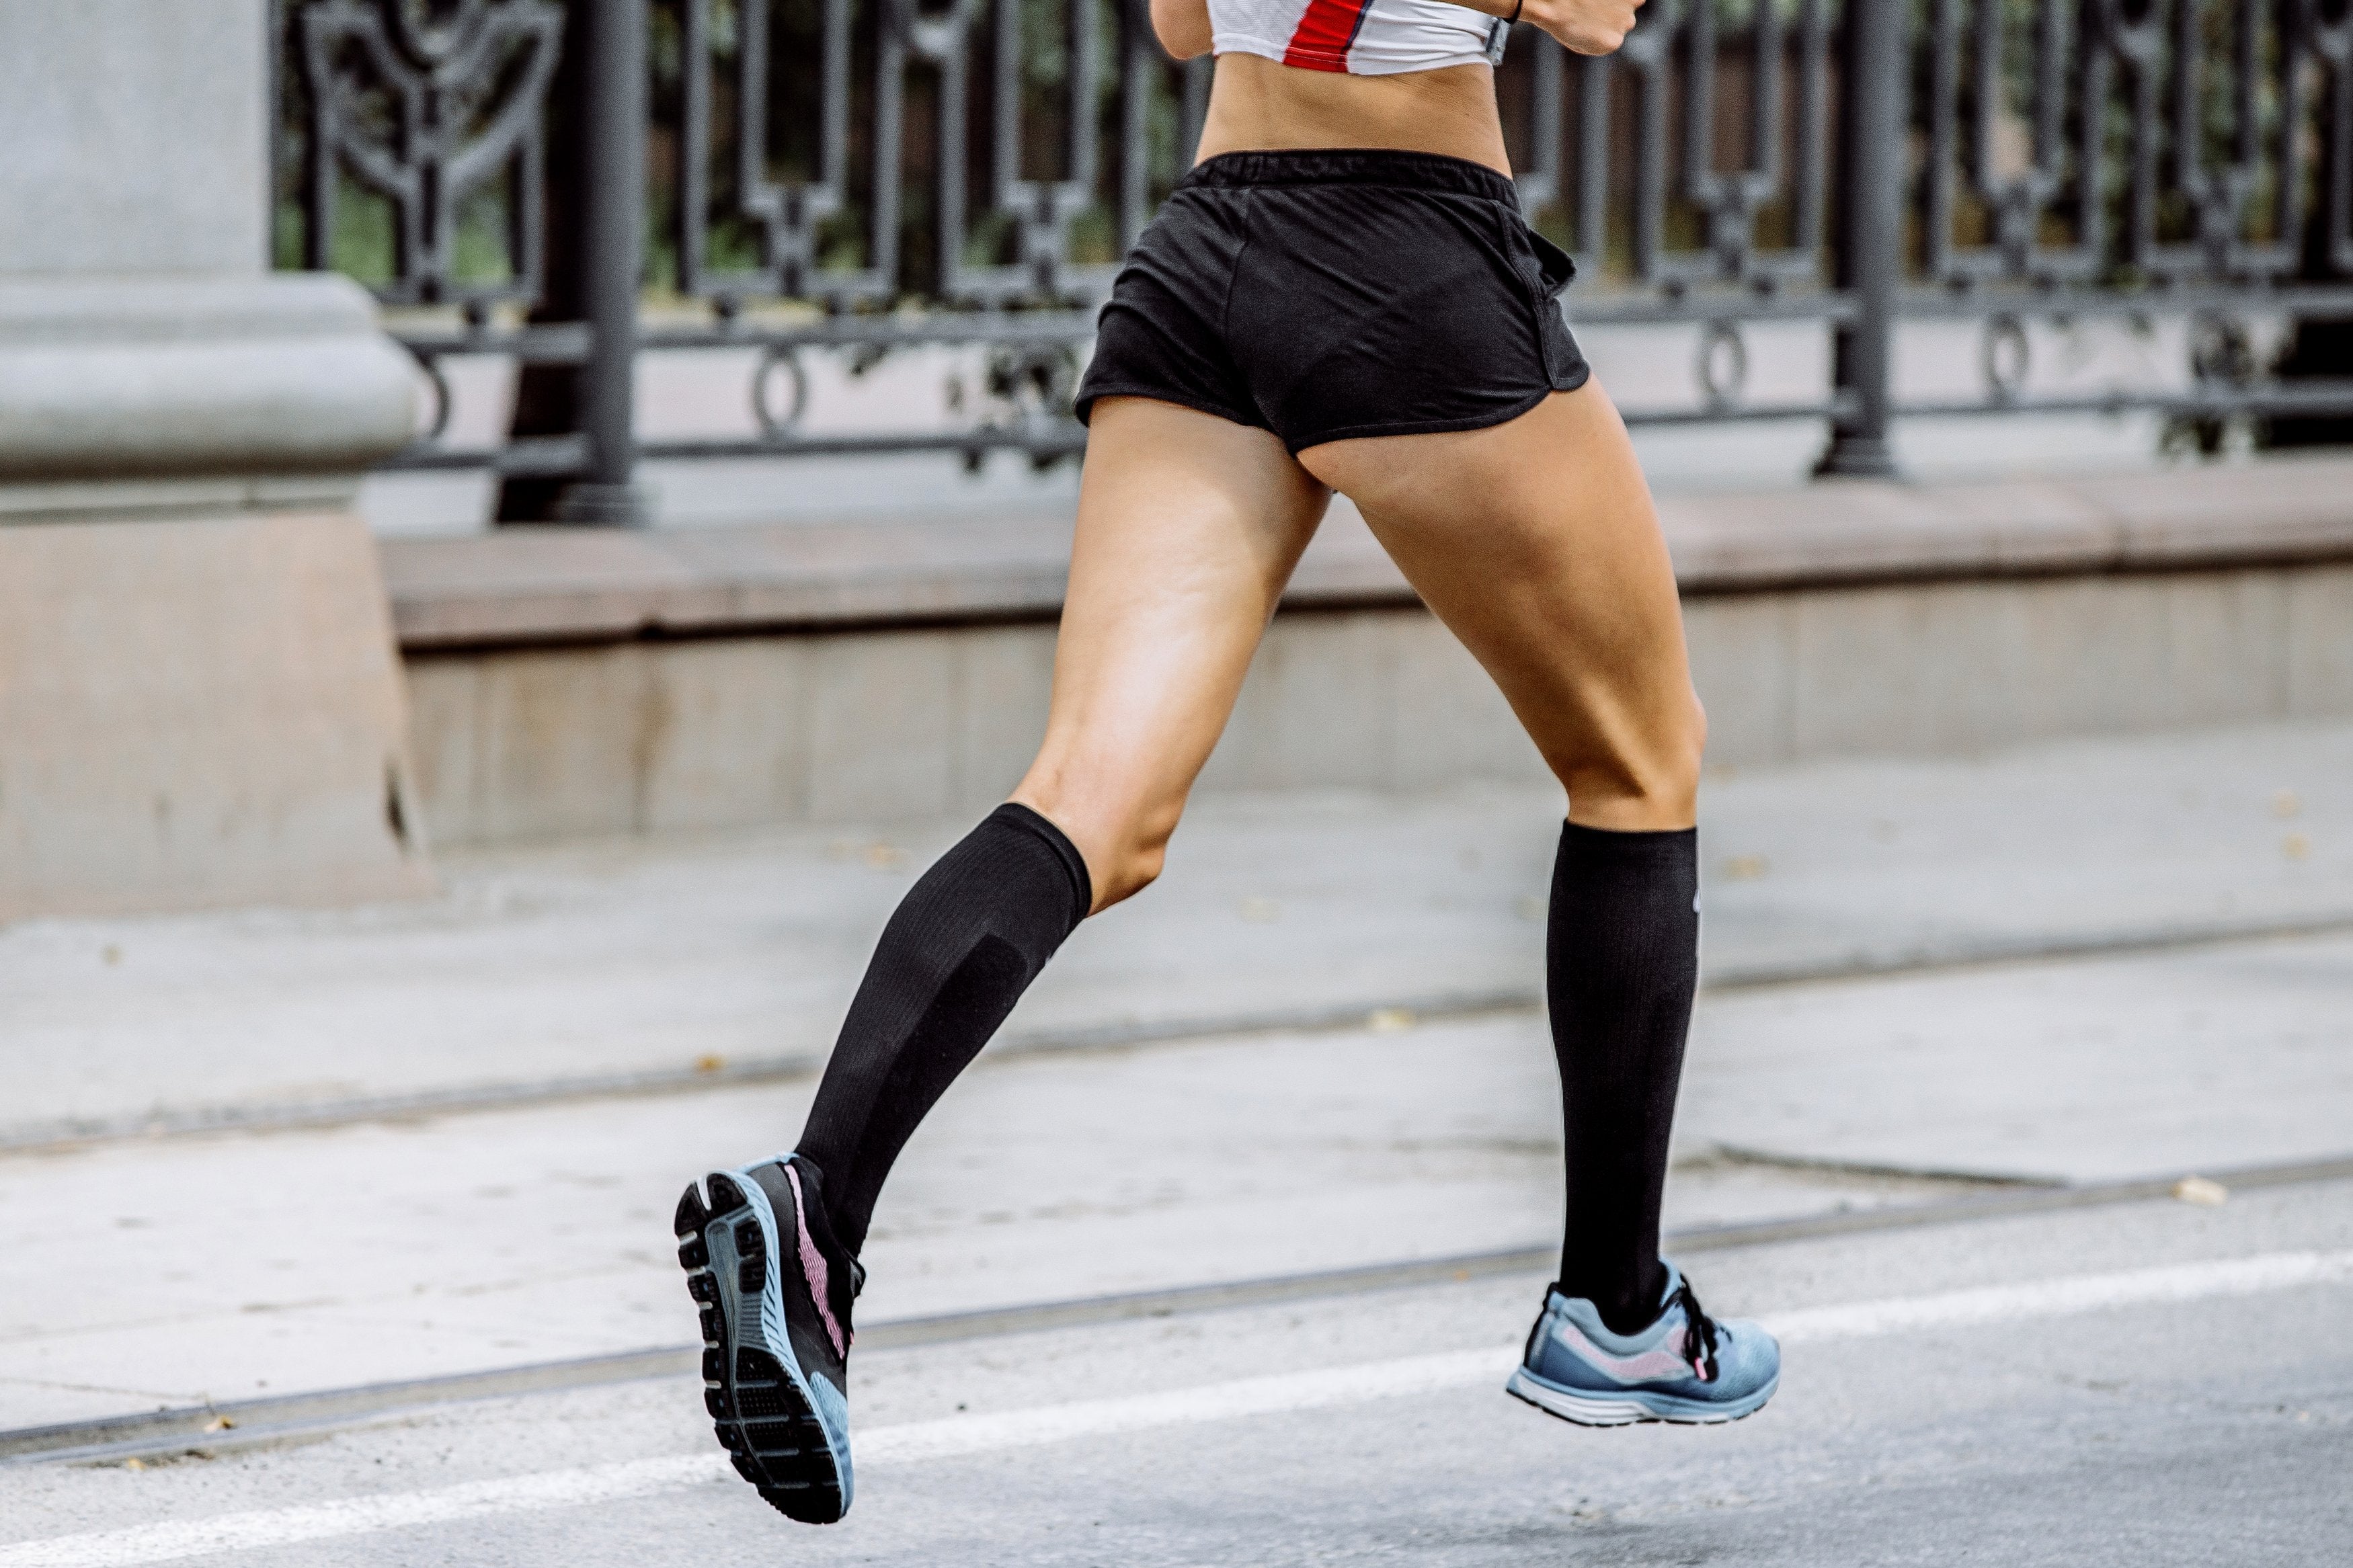 7 Benefits of Wearing Compression Garments